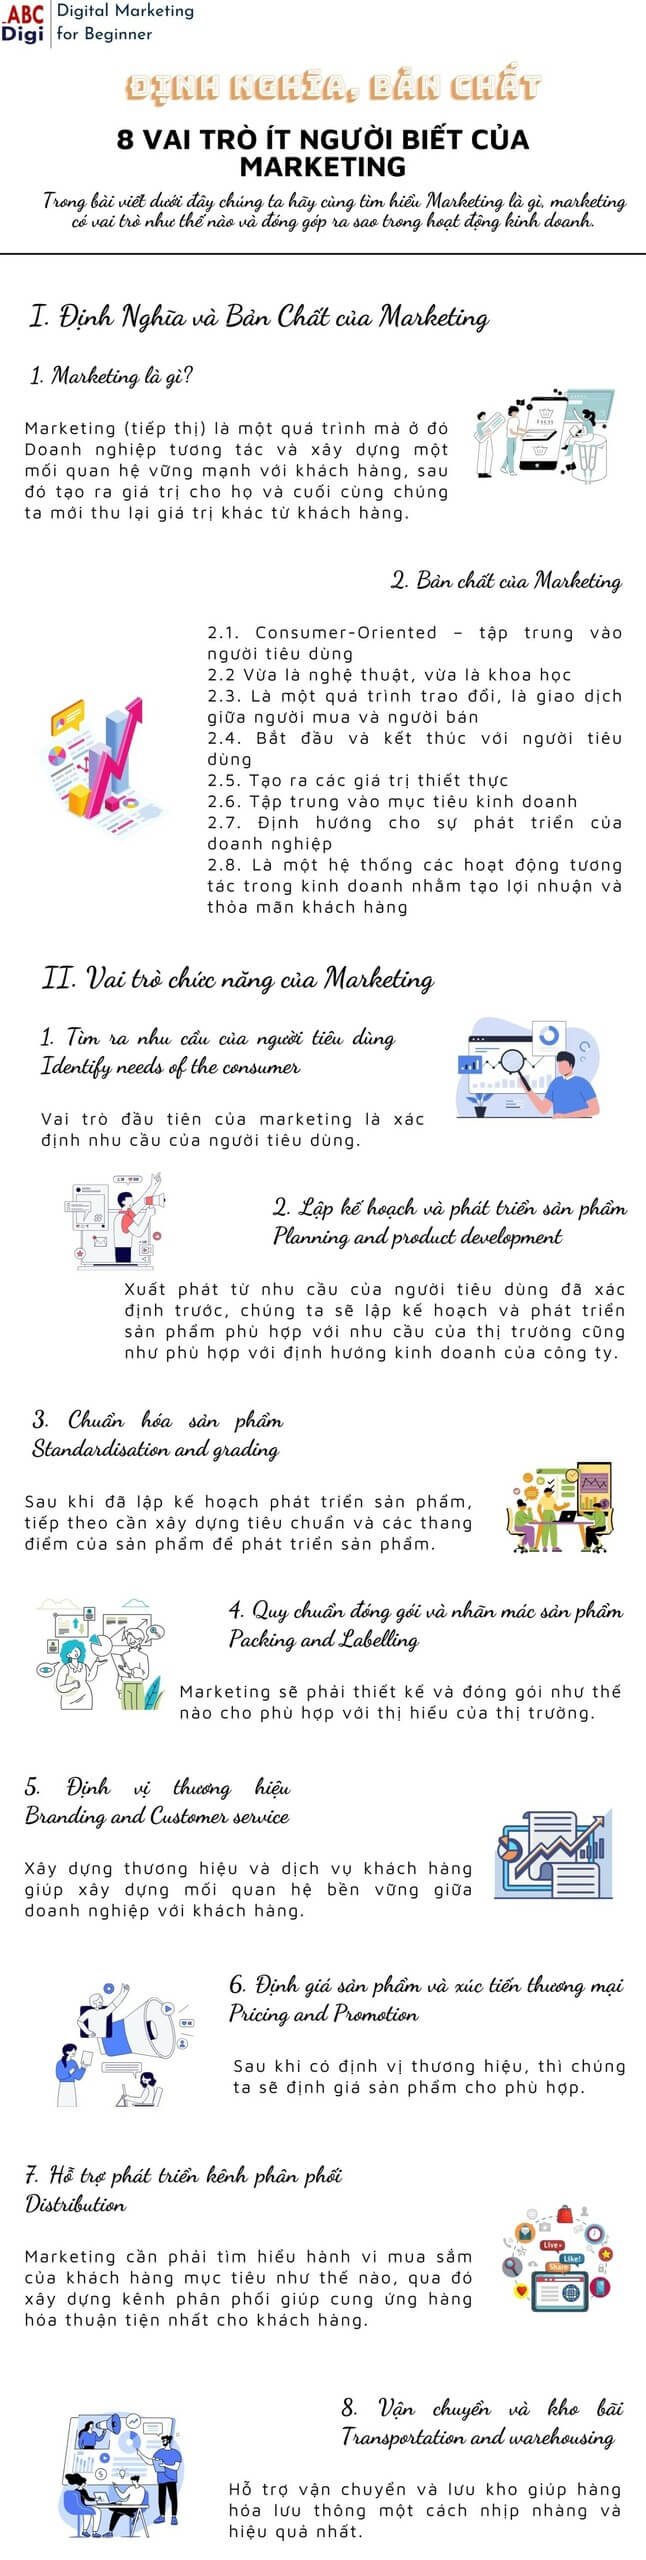 infographic dinh nghia vai tro marketing scaled